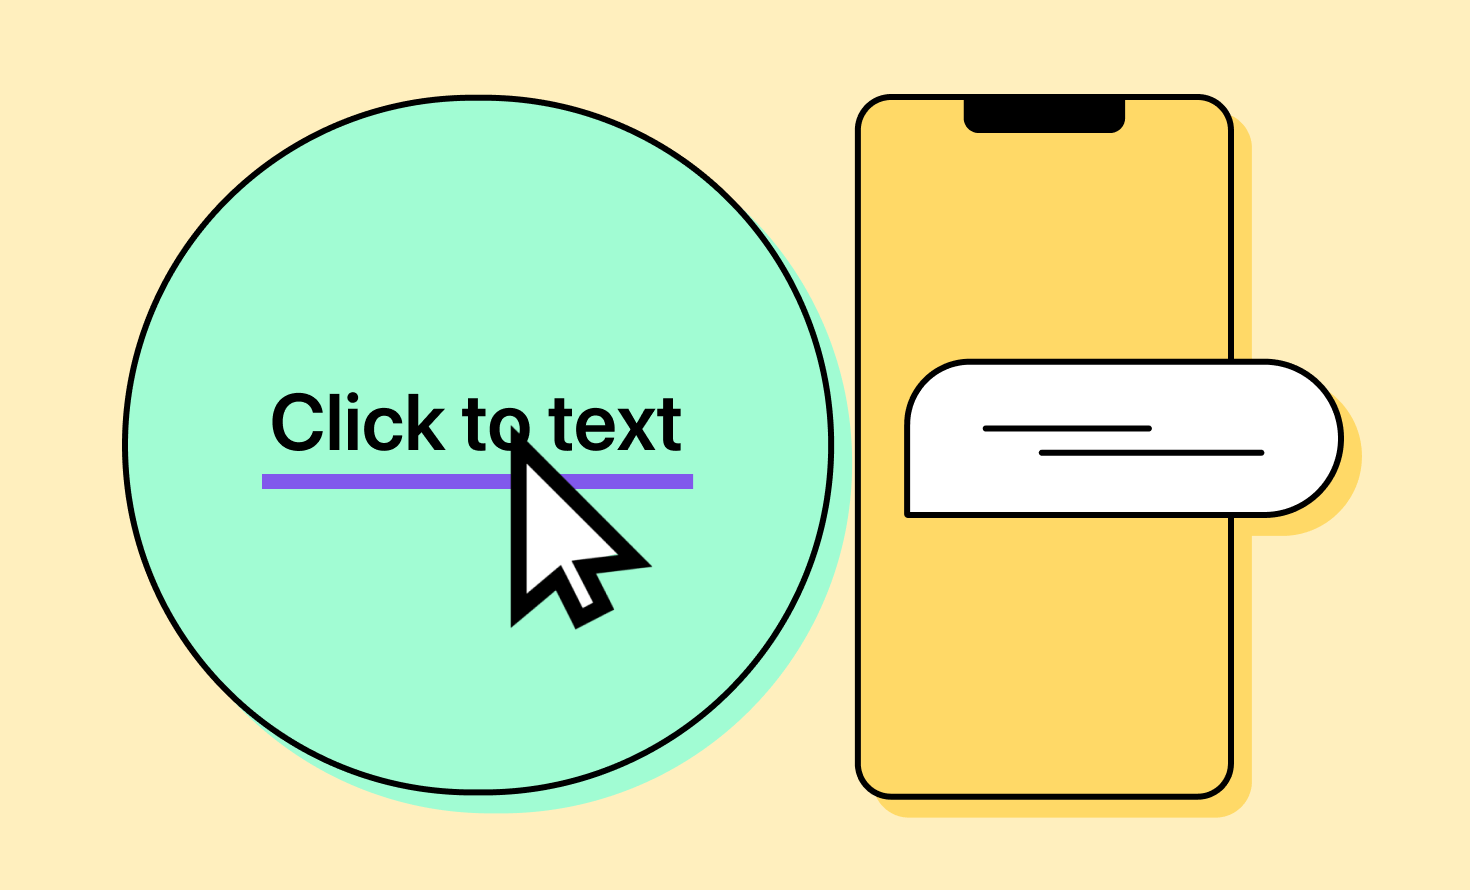 Illustration of a green circle with the text "Click to text" and a mobile phone frame to its right.